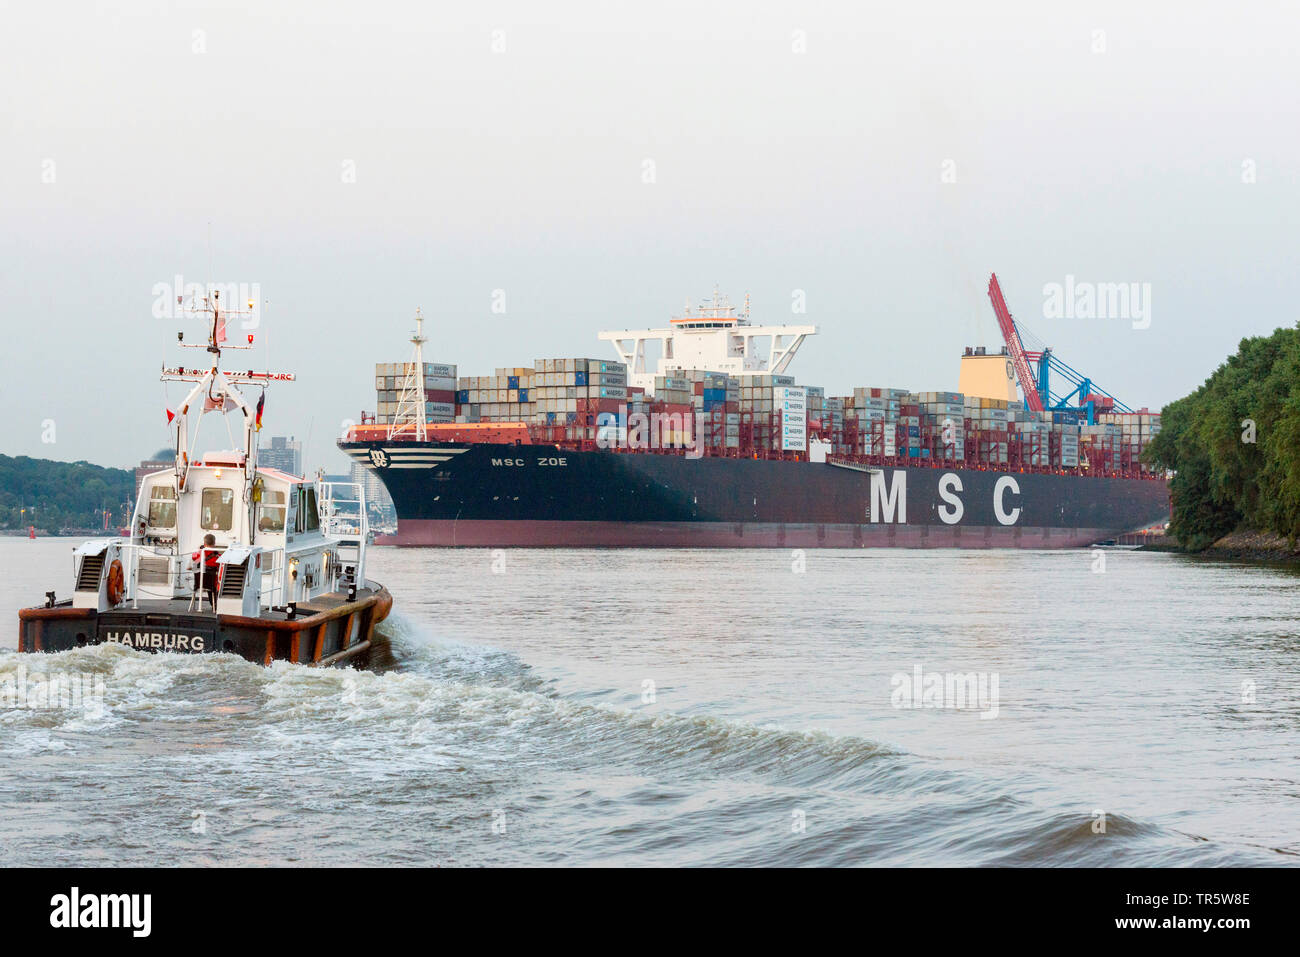 MSC Zoe, largest containership in the world, in the Port of Hamburg, Germany, Hamburg Stock Photo